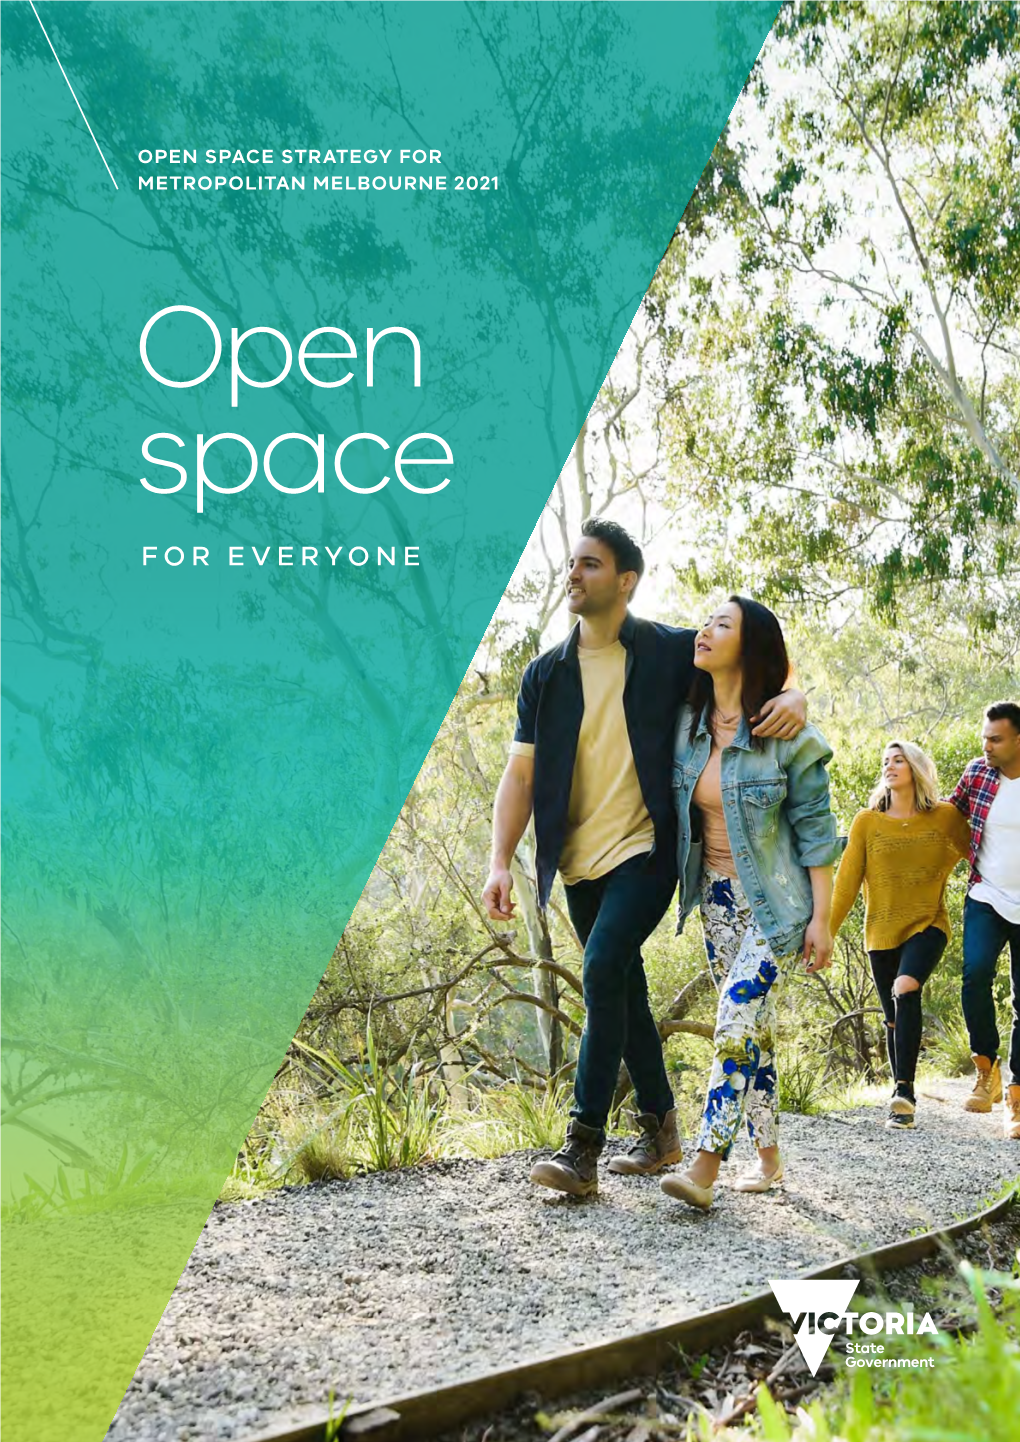 Open Space for Everyone Strategy